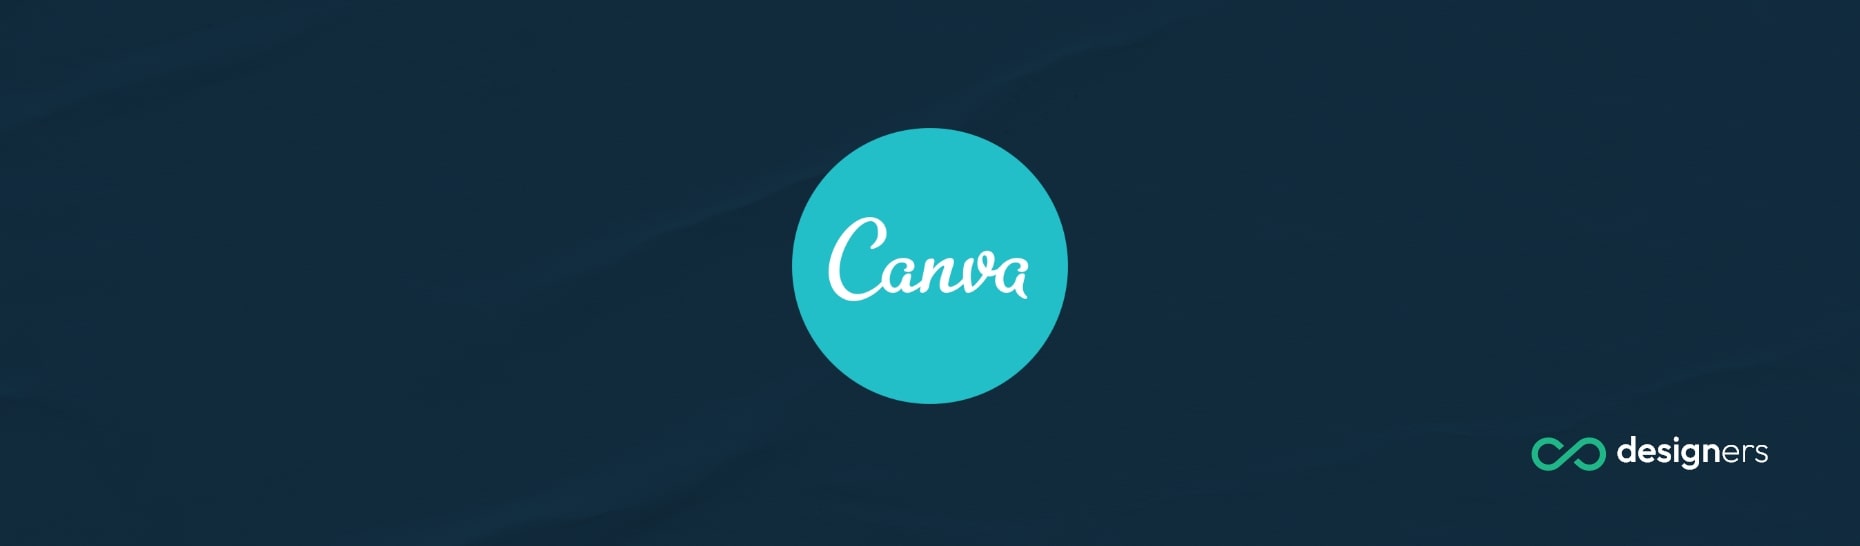 Why Is Canva the Best?